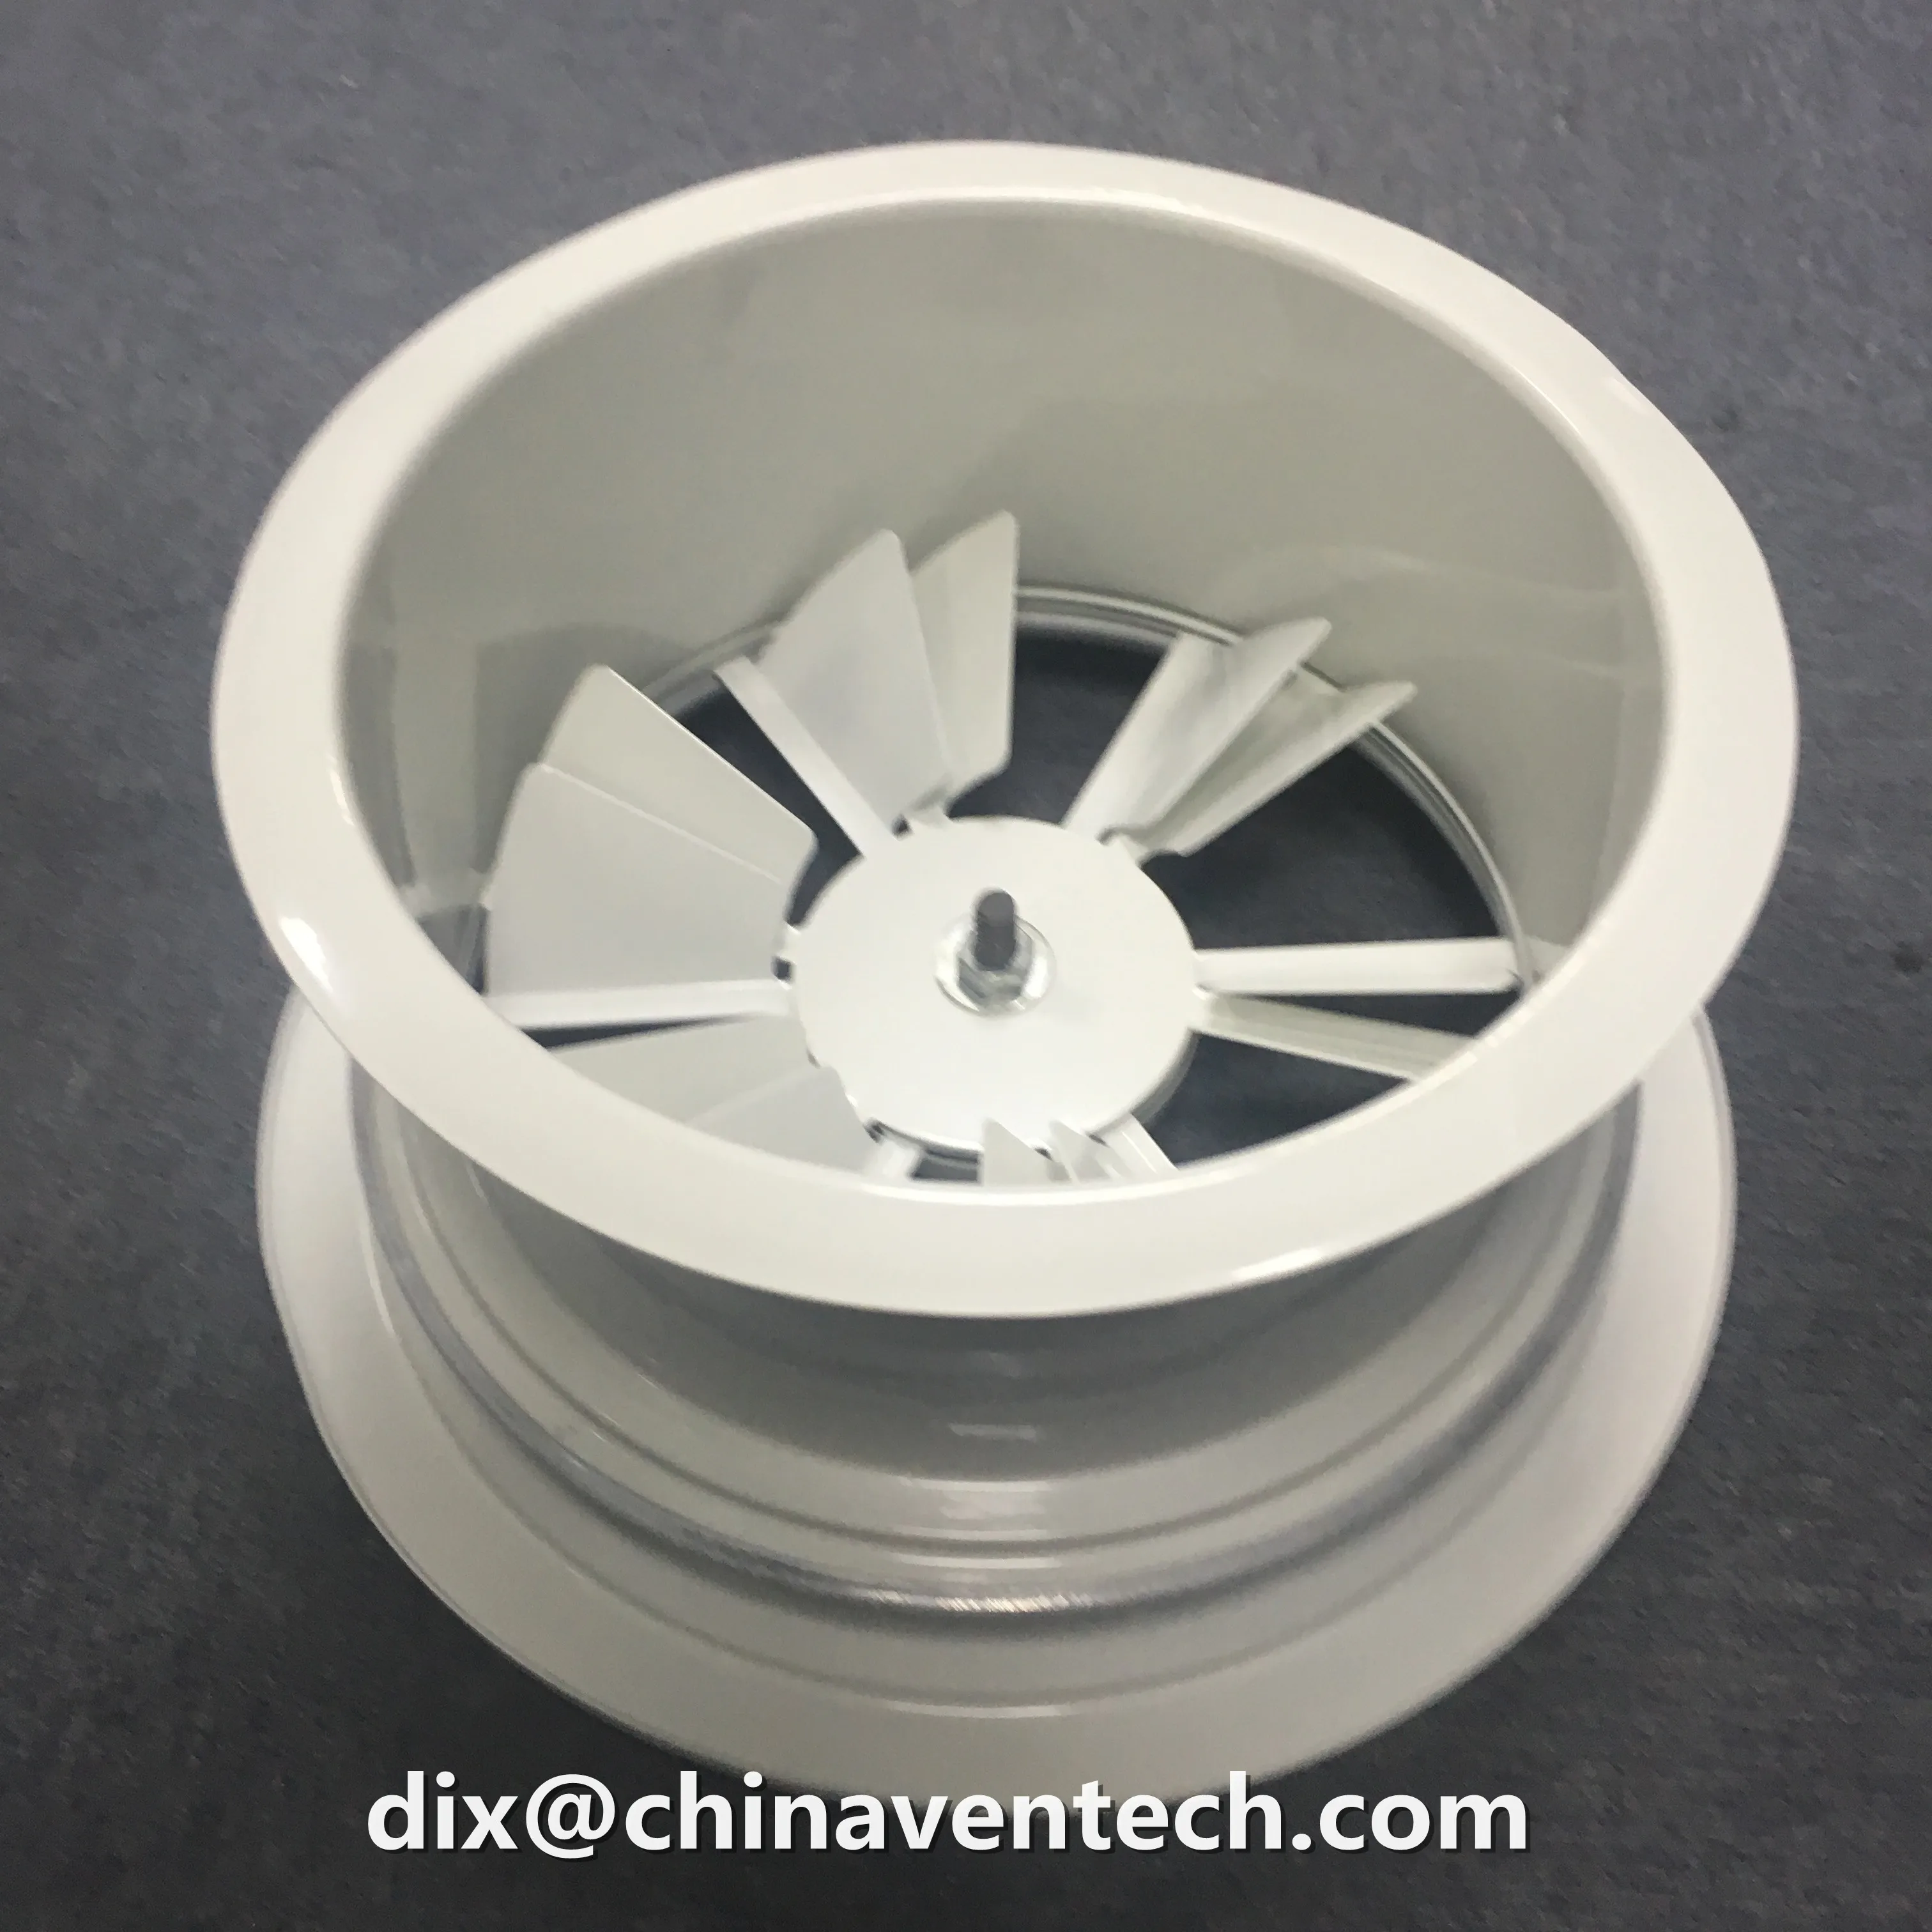 Hvac air duct working volume control damper round swirl diffuser with fixed blades